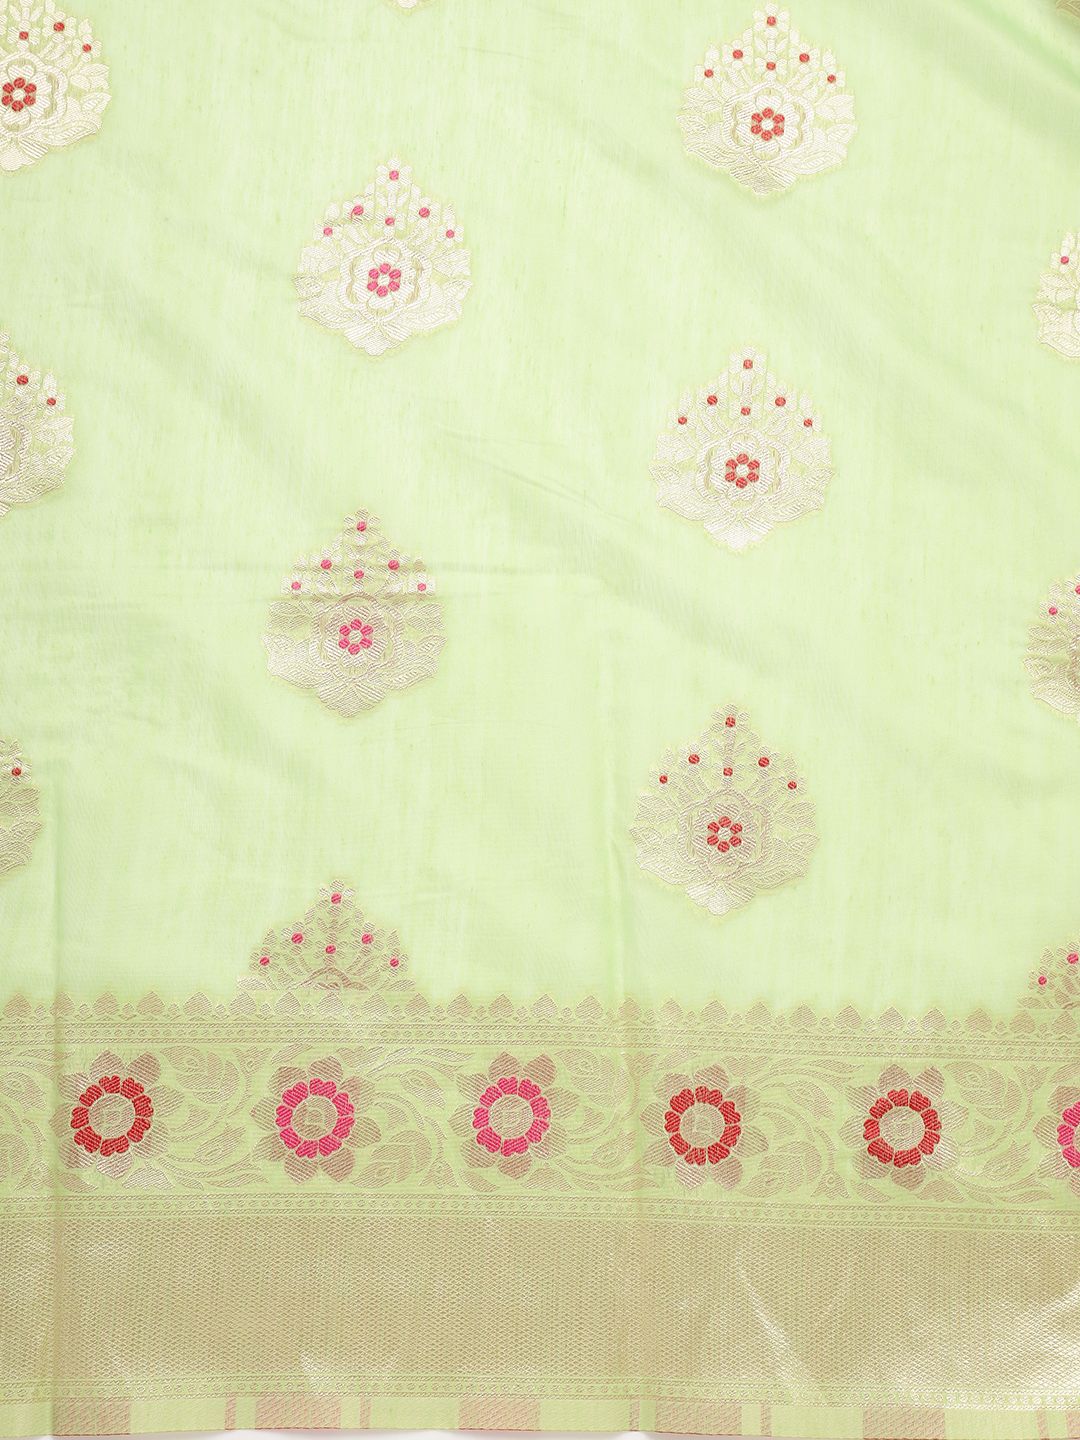 Pista Green Party Wear Sarees for Women